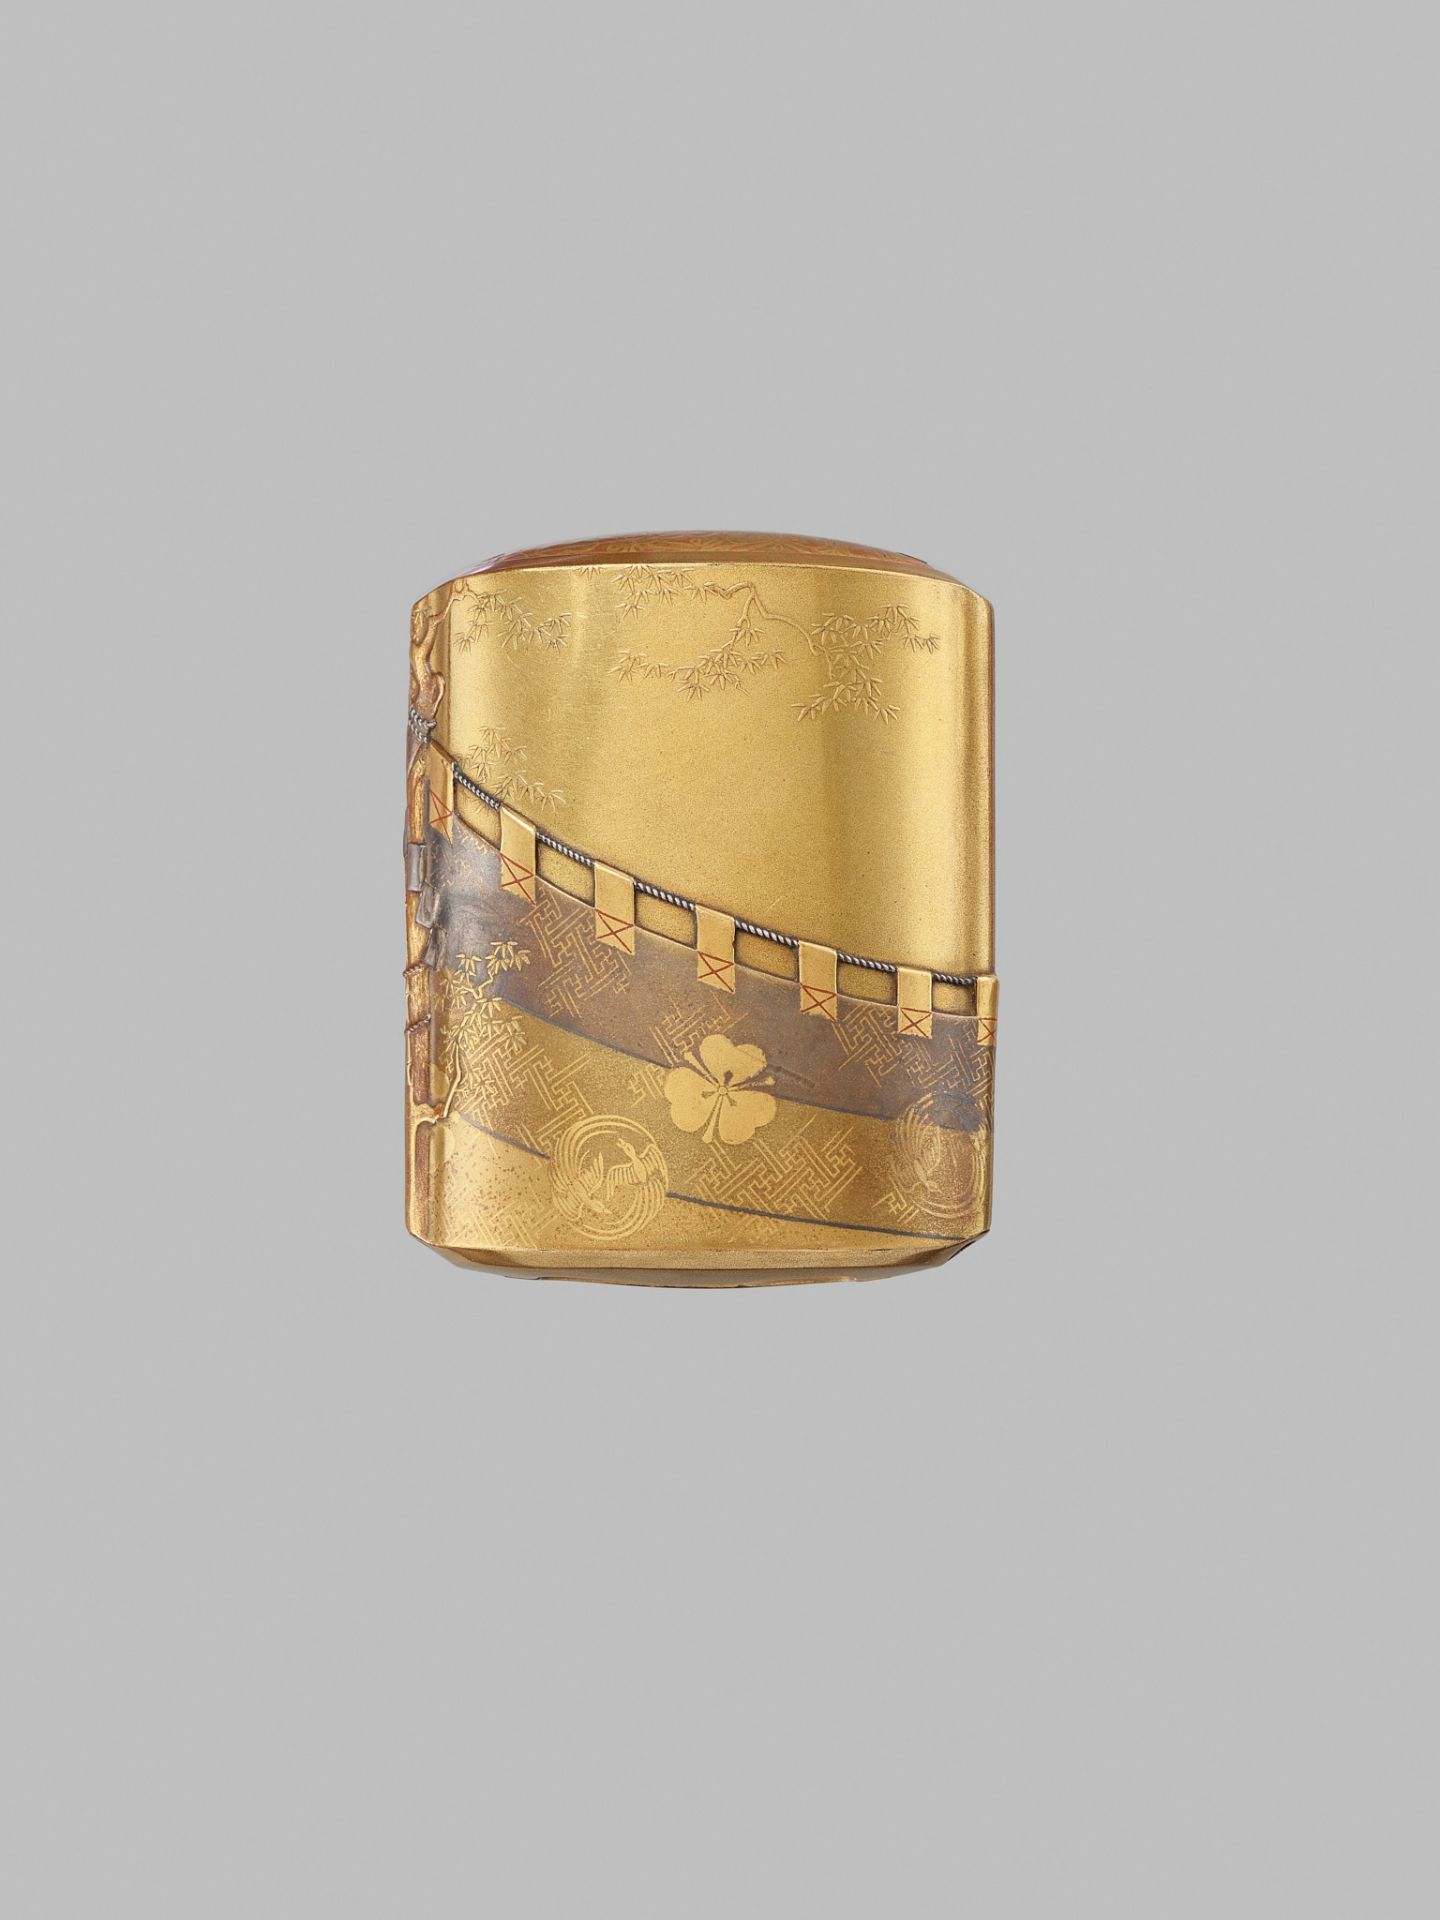 A RARE METAL-INLAID GOLD-LACQUER FOUR CASE SAYA (SHEATH) INRO DEPICTING SUMO WRESTLERS - Image 3 of 7